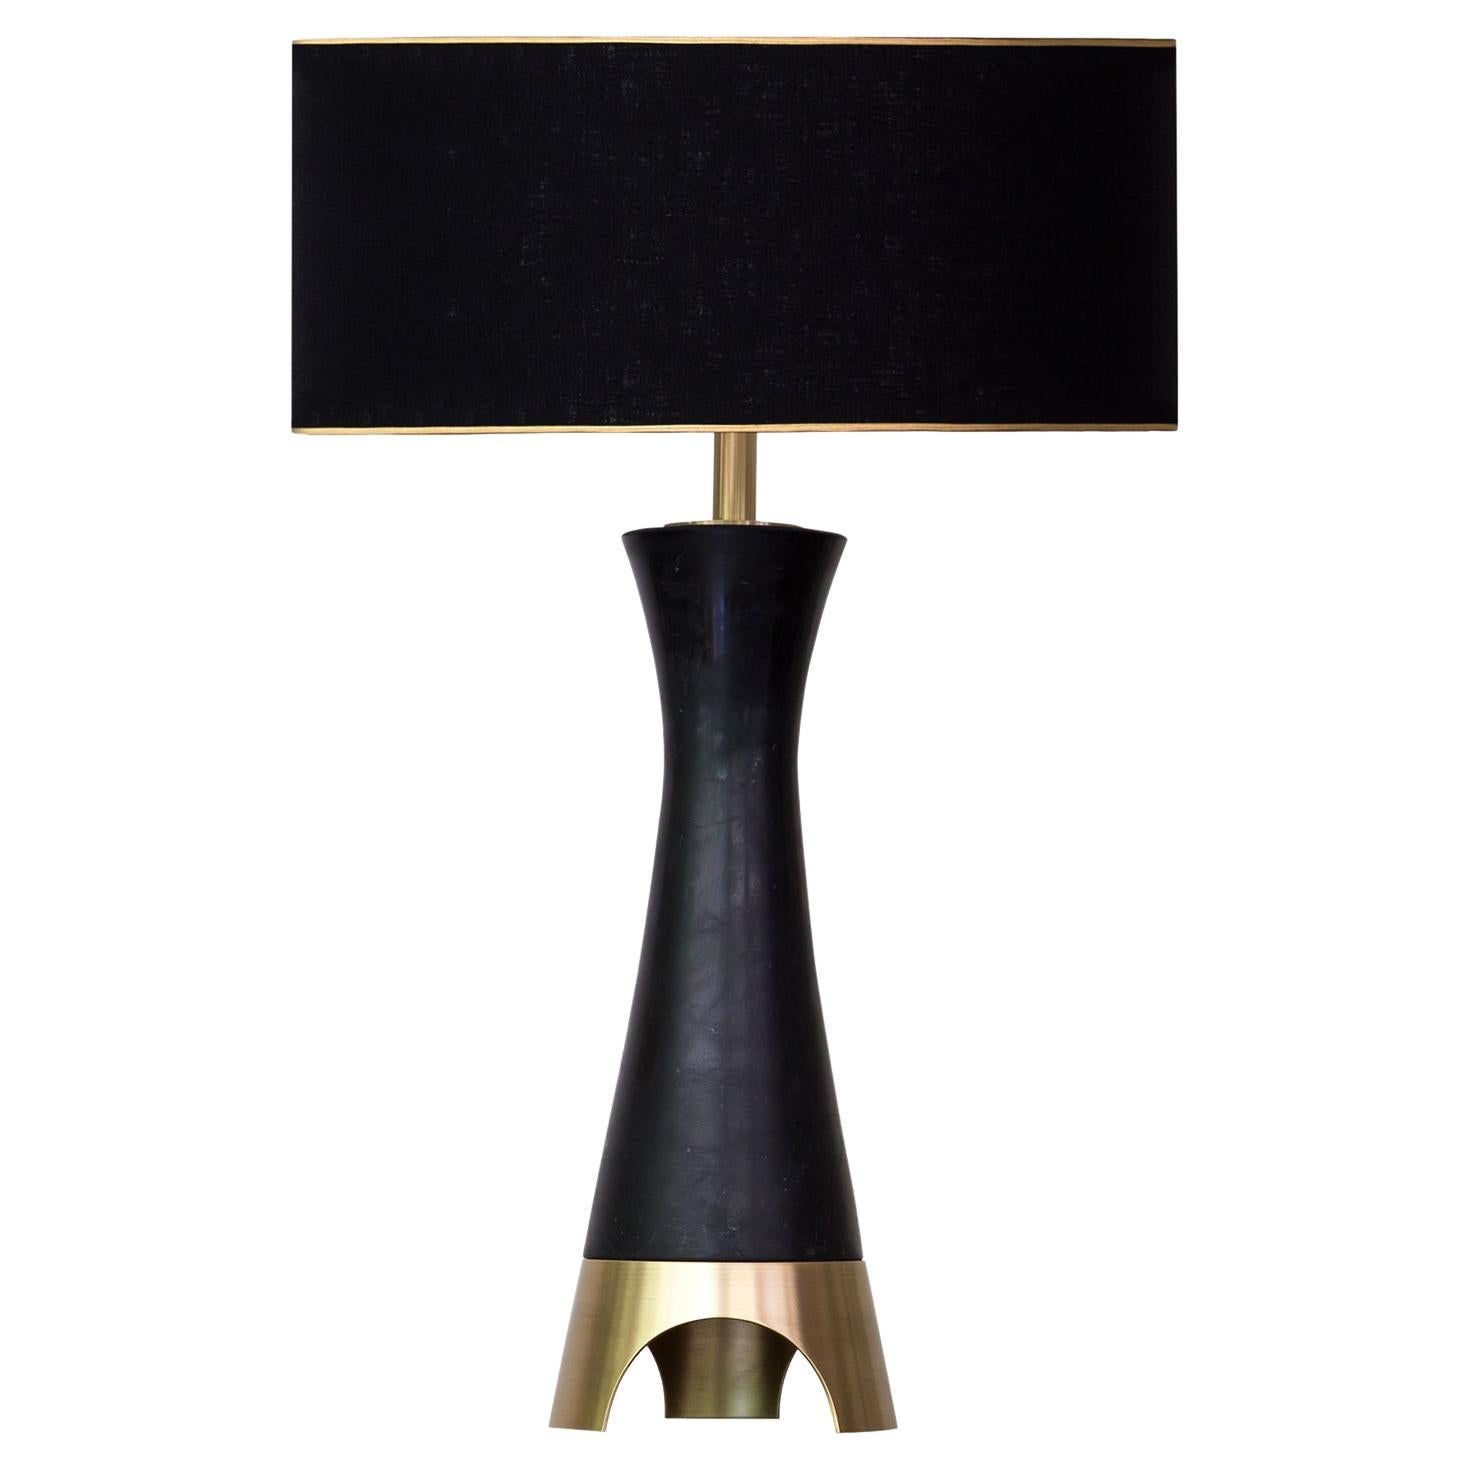 Contemporary Handmade Table Lamp "Aichmé" Solid Marble and Brass Base by Anaktae